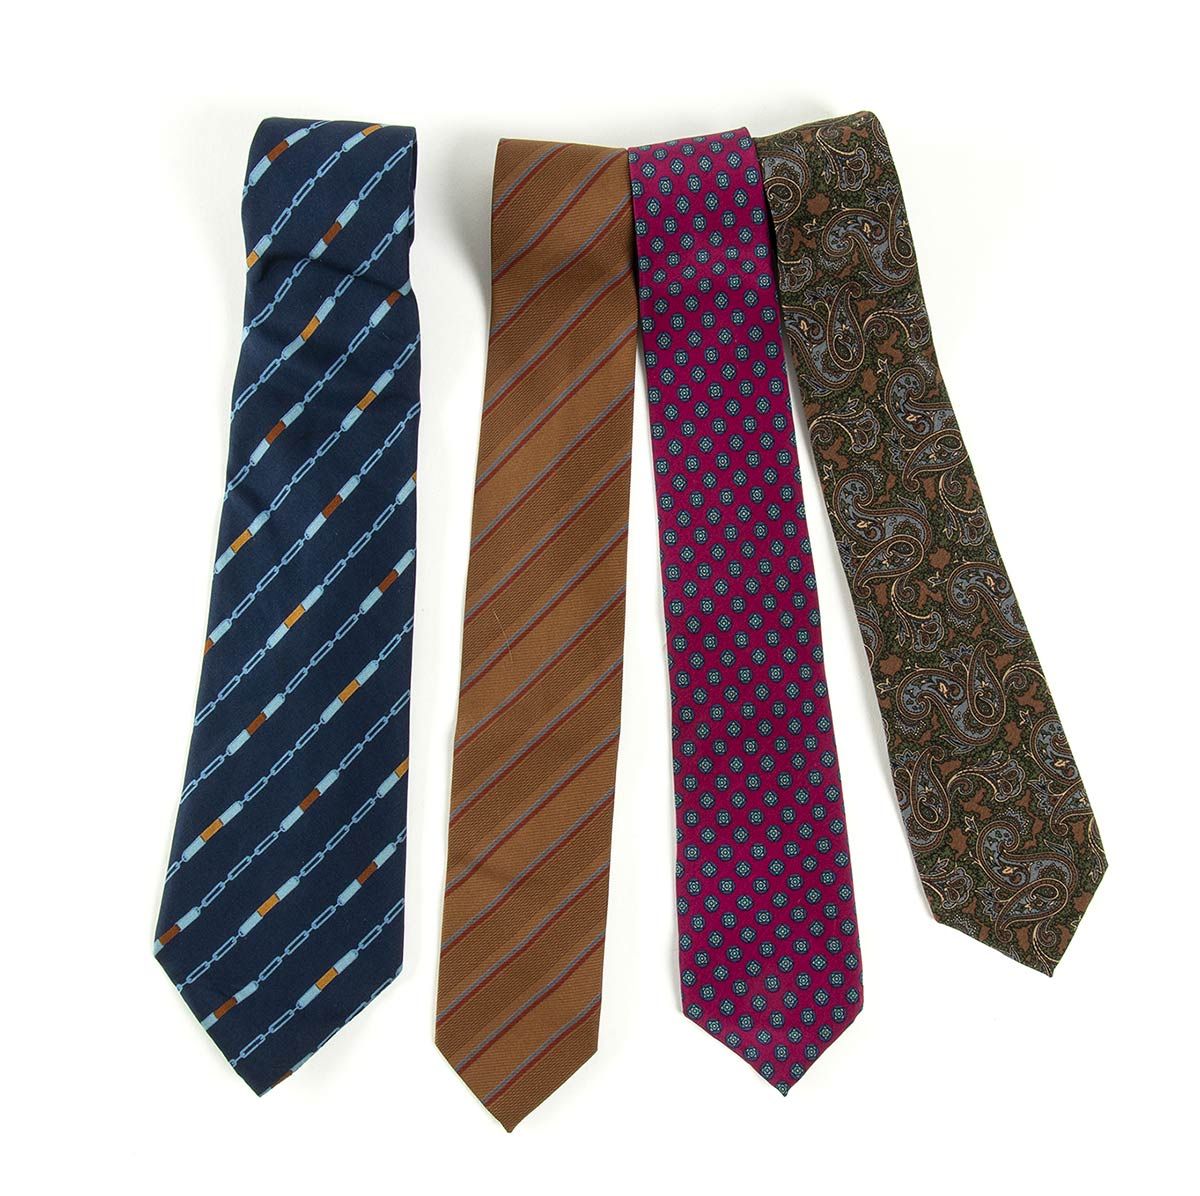 Null LOT OF 4 TIES

70s / 80s



A lot of 4 ties



General conditions grading B